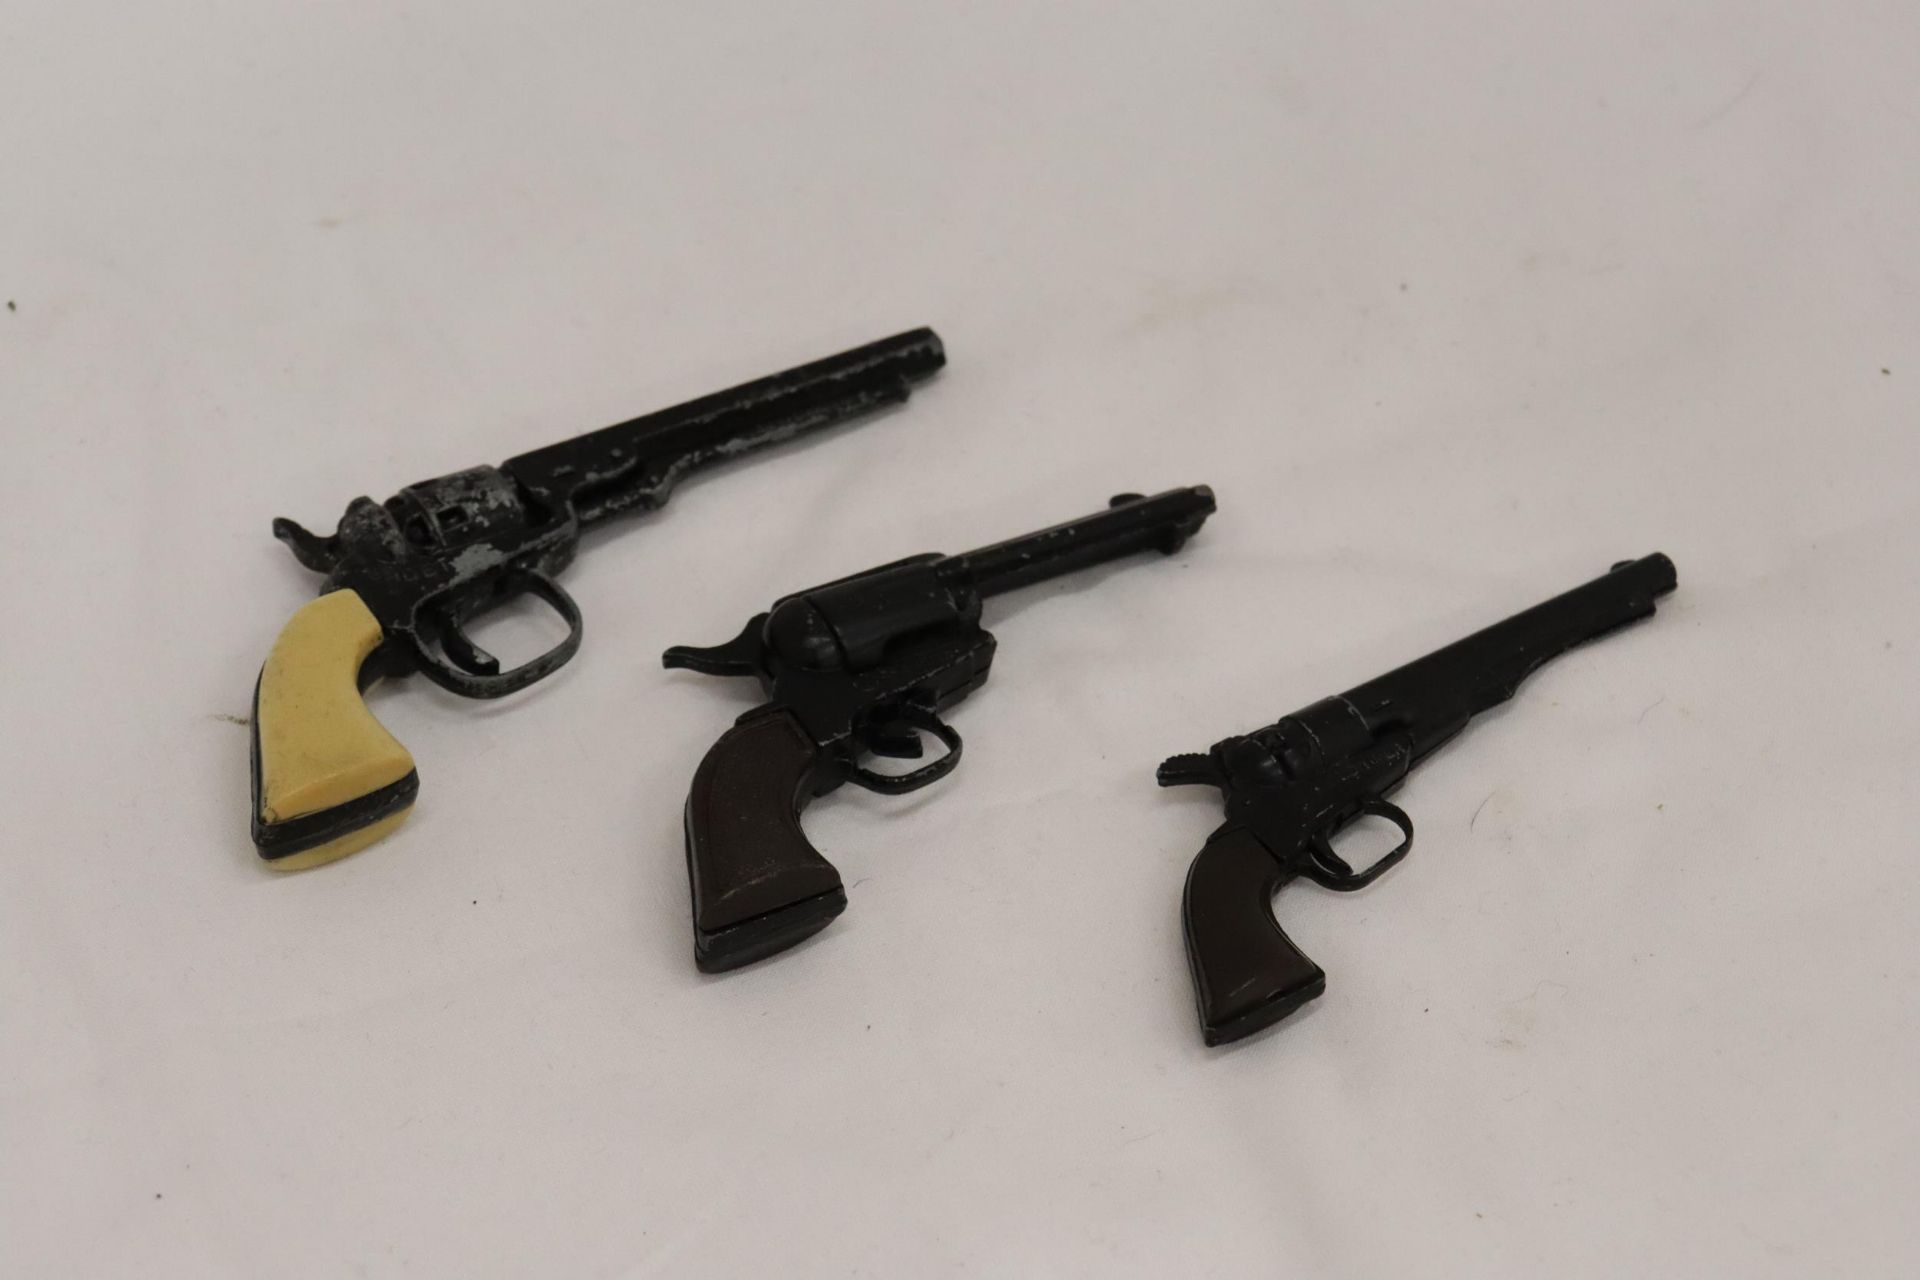 THREE SMALL VINTAGE COCKING AND FIRING GUNS, 'OLD TIMER', 'CADET' AND 'FRONTIER', LENGTH 11CM - Image 3 of 7